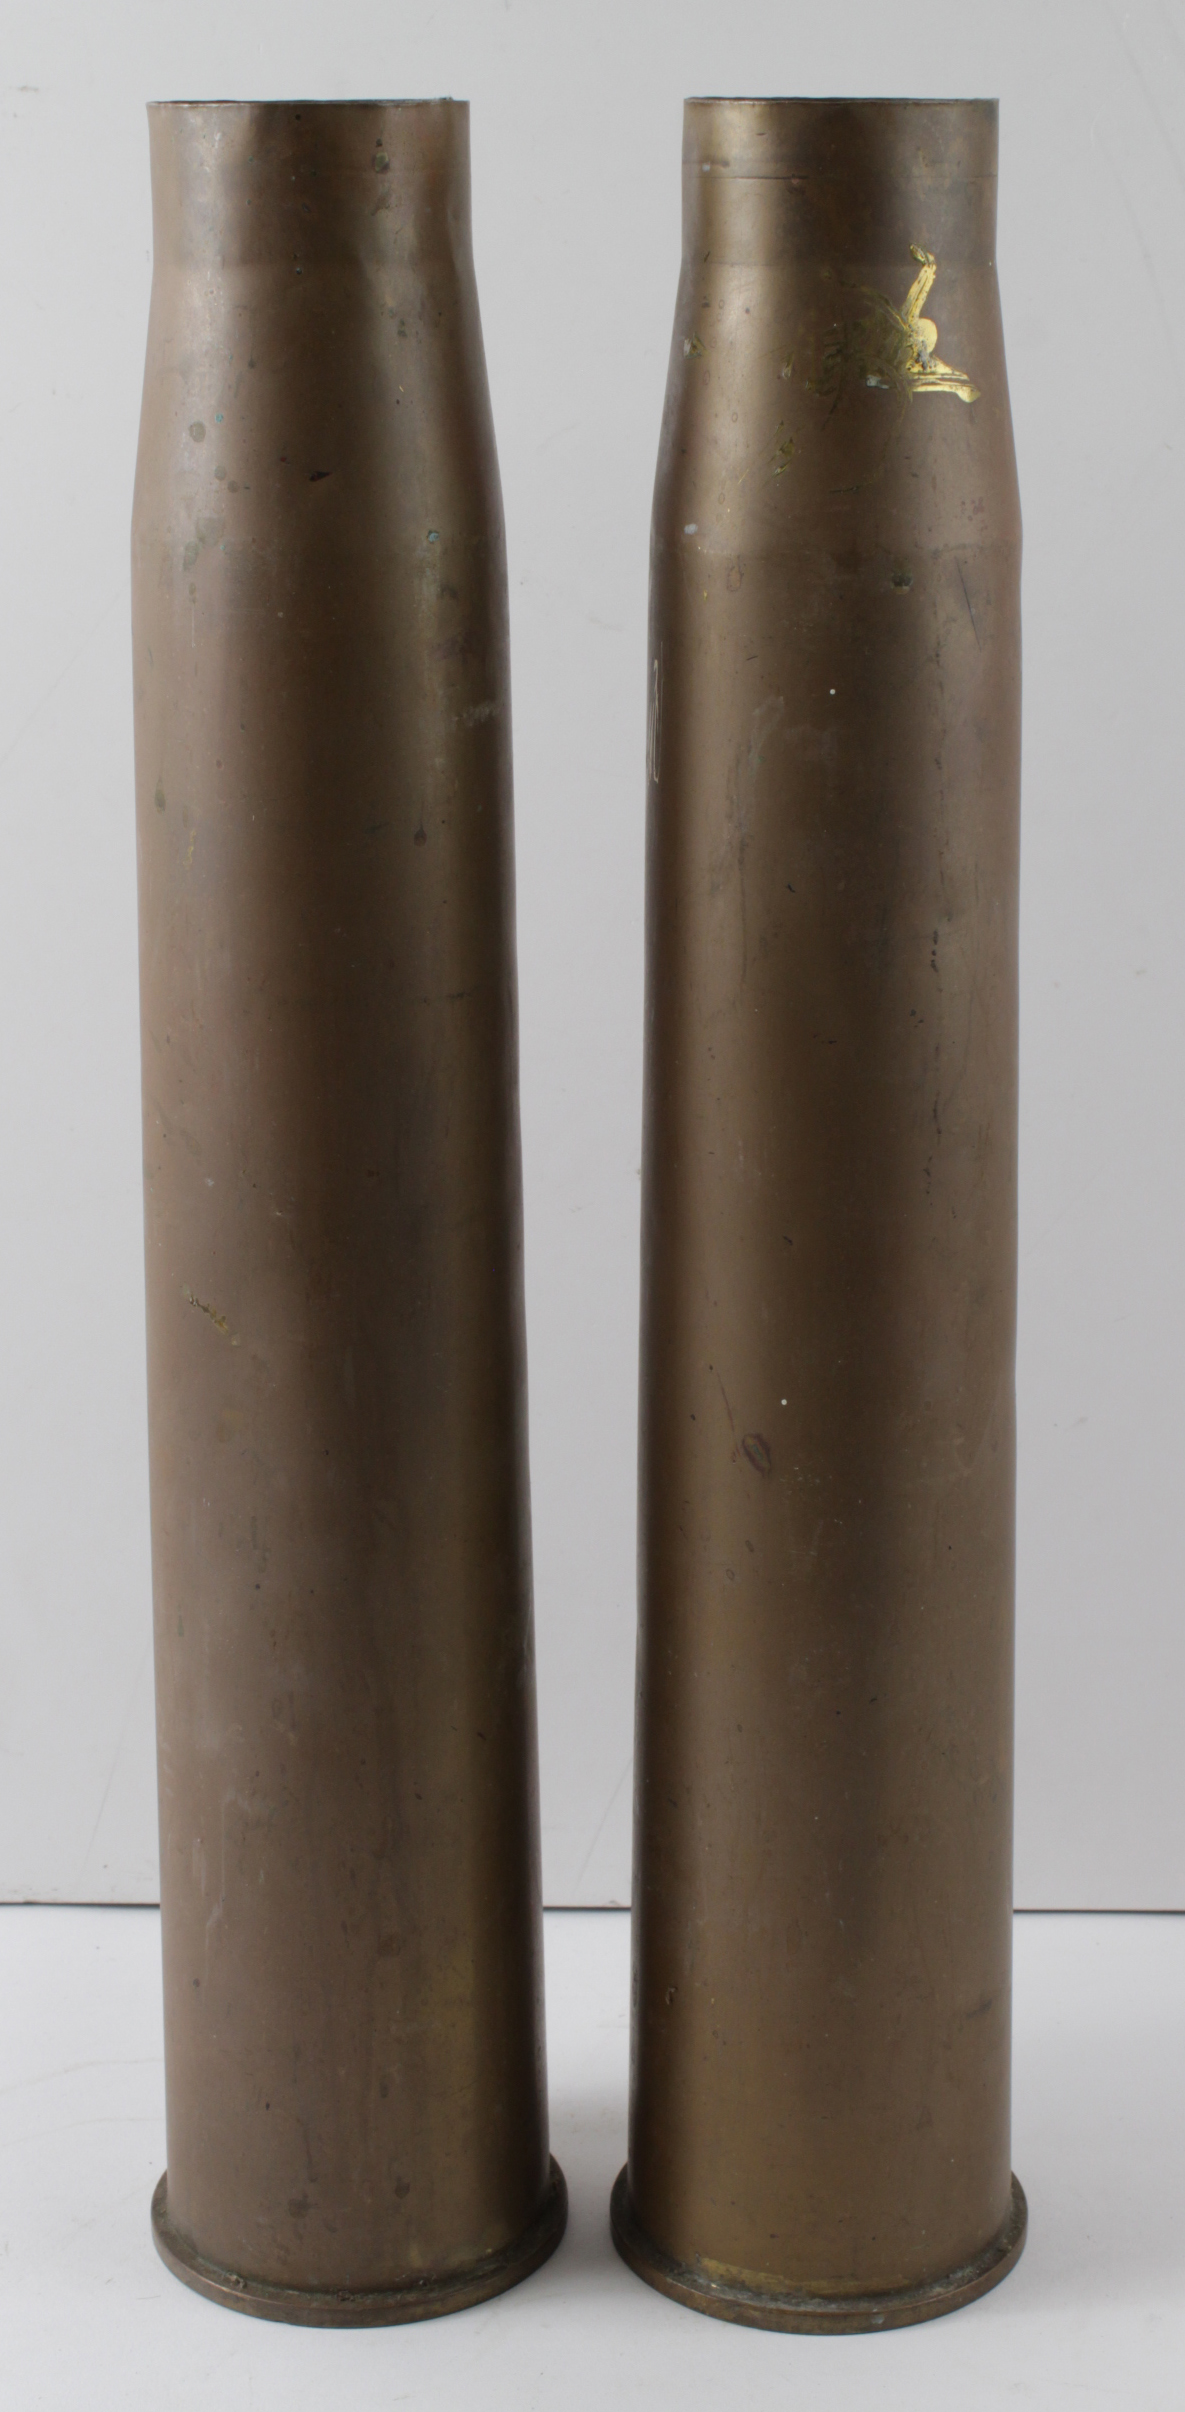 Shell cases pair of WW2 dated 6 pd brass cases.